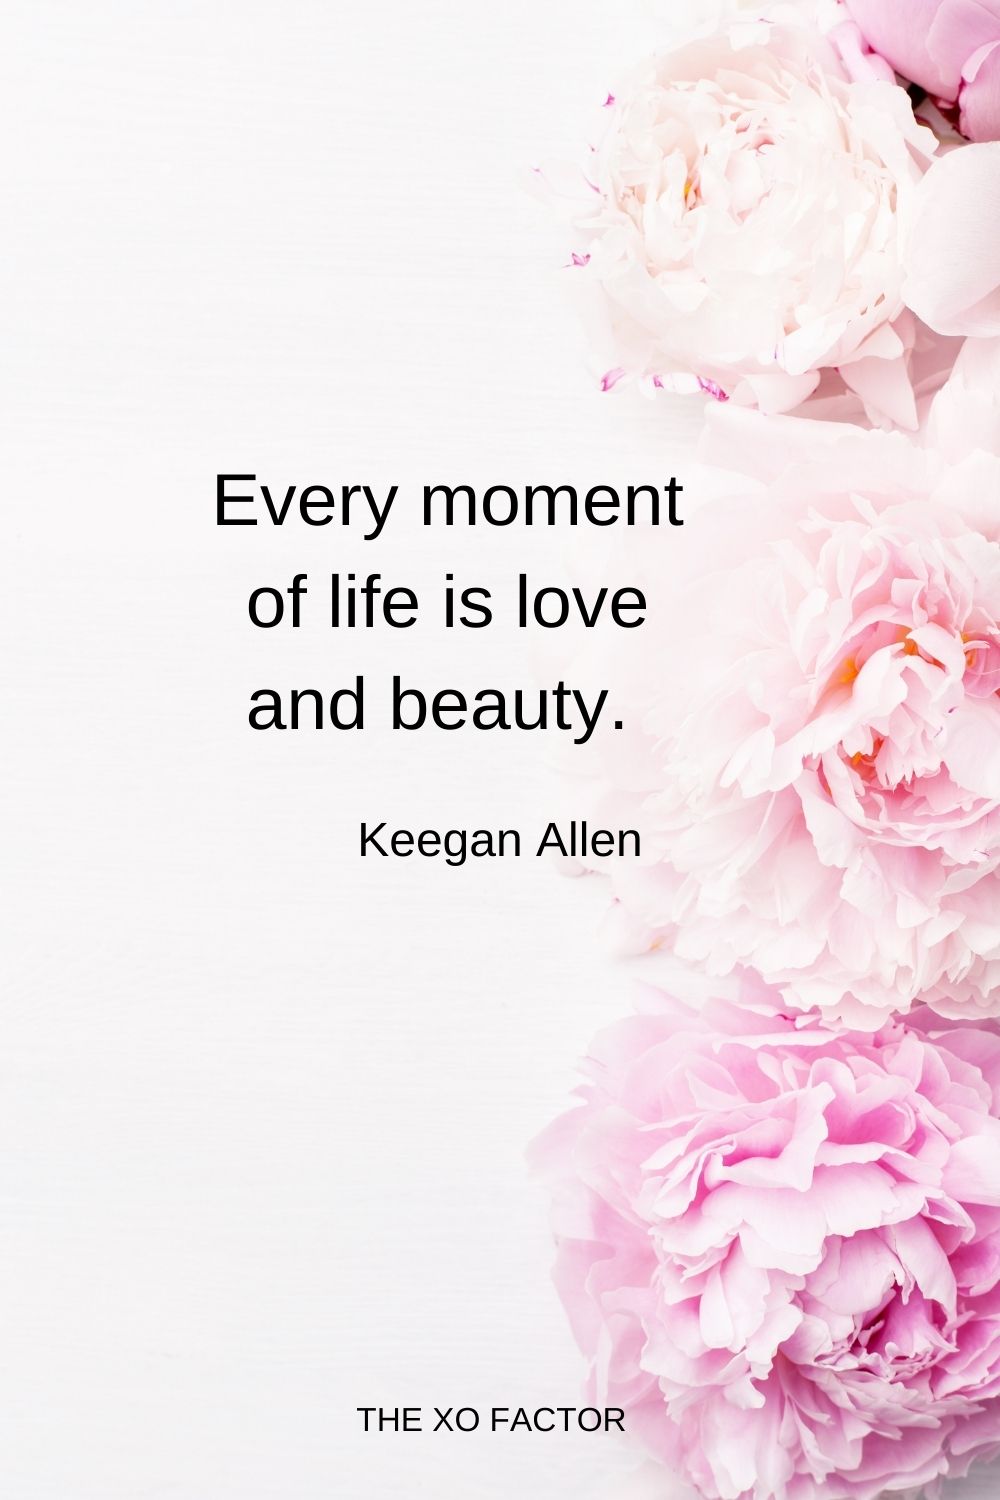 Every moment of life is love and beauty.  Keegan Allen